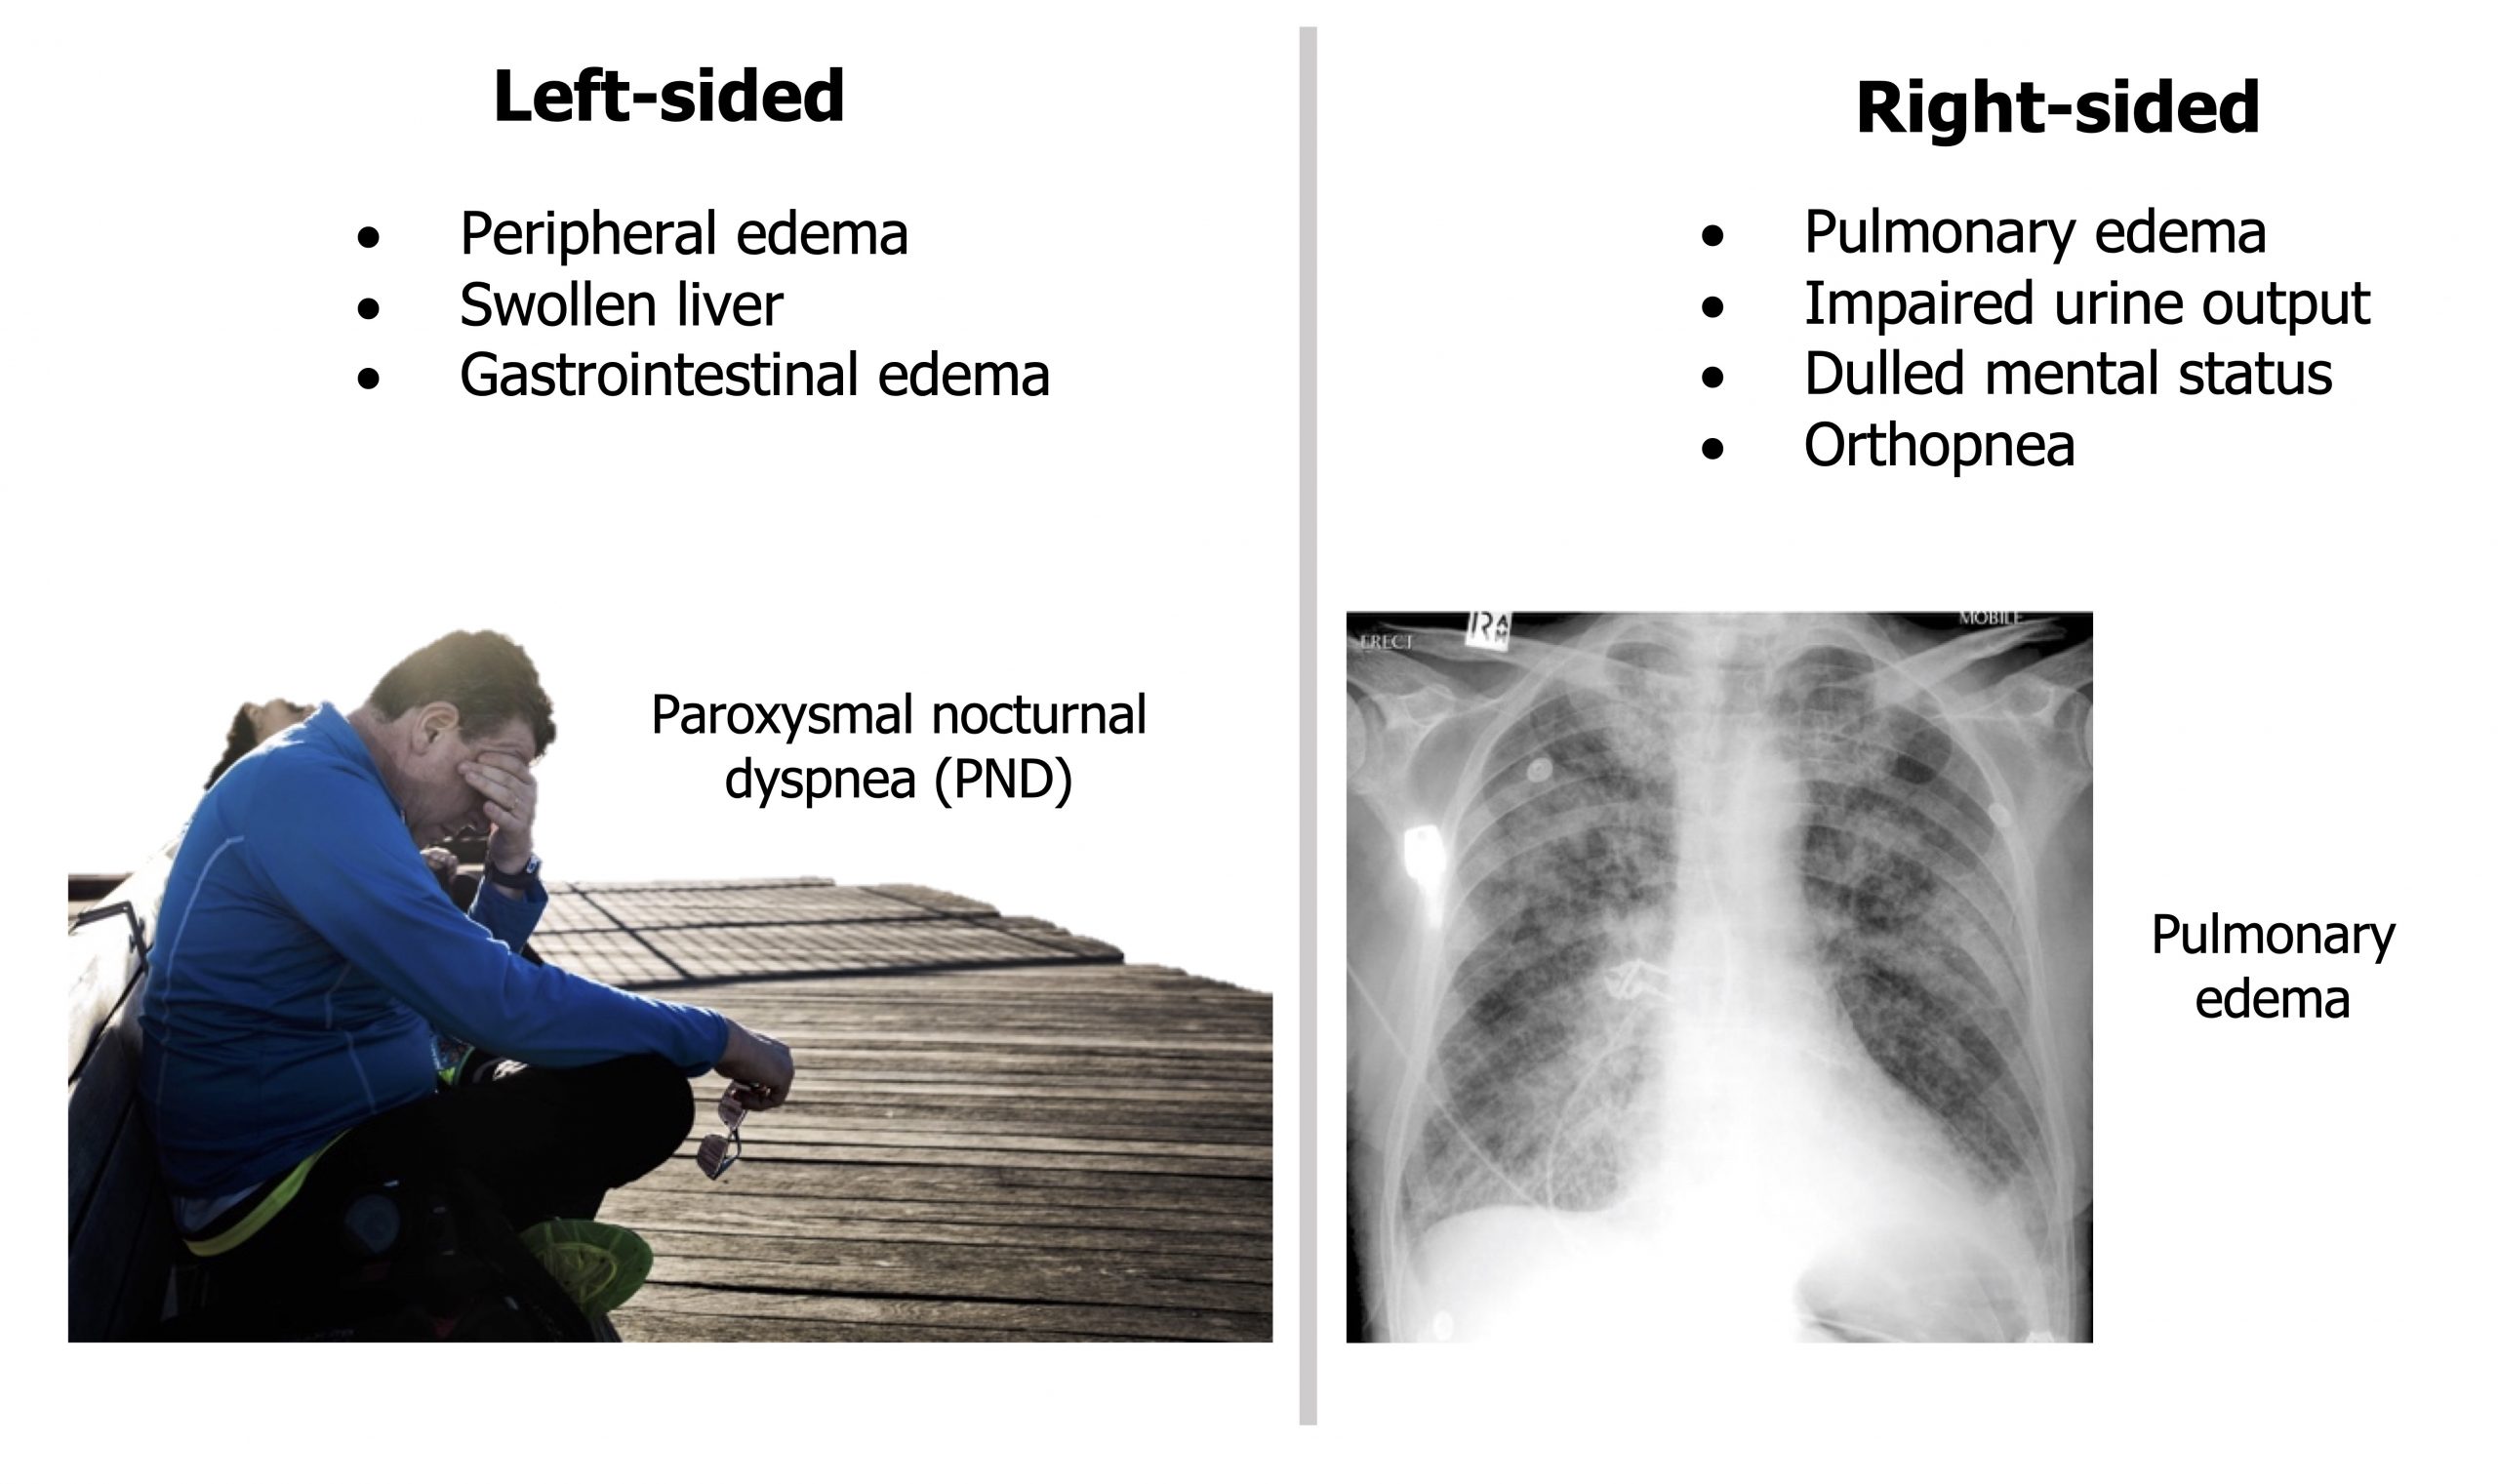 Left-sided: peripheral edema, swollen liver, and GI edema. Figure shows a man sitting upright on the ground leaning his head into his hand and is labeled paroxysmal nocturnal dyspnea (PND). Right-sided: pulmonary edema, impaired urine output, dulled mental status, orthopnea. Figure shows edema in a chest radiograph.